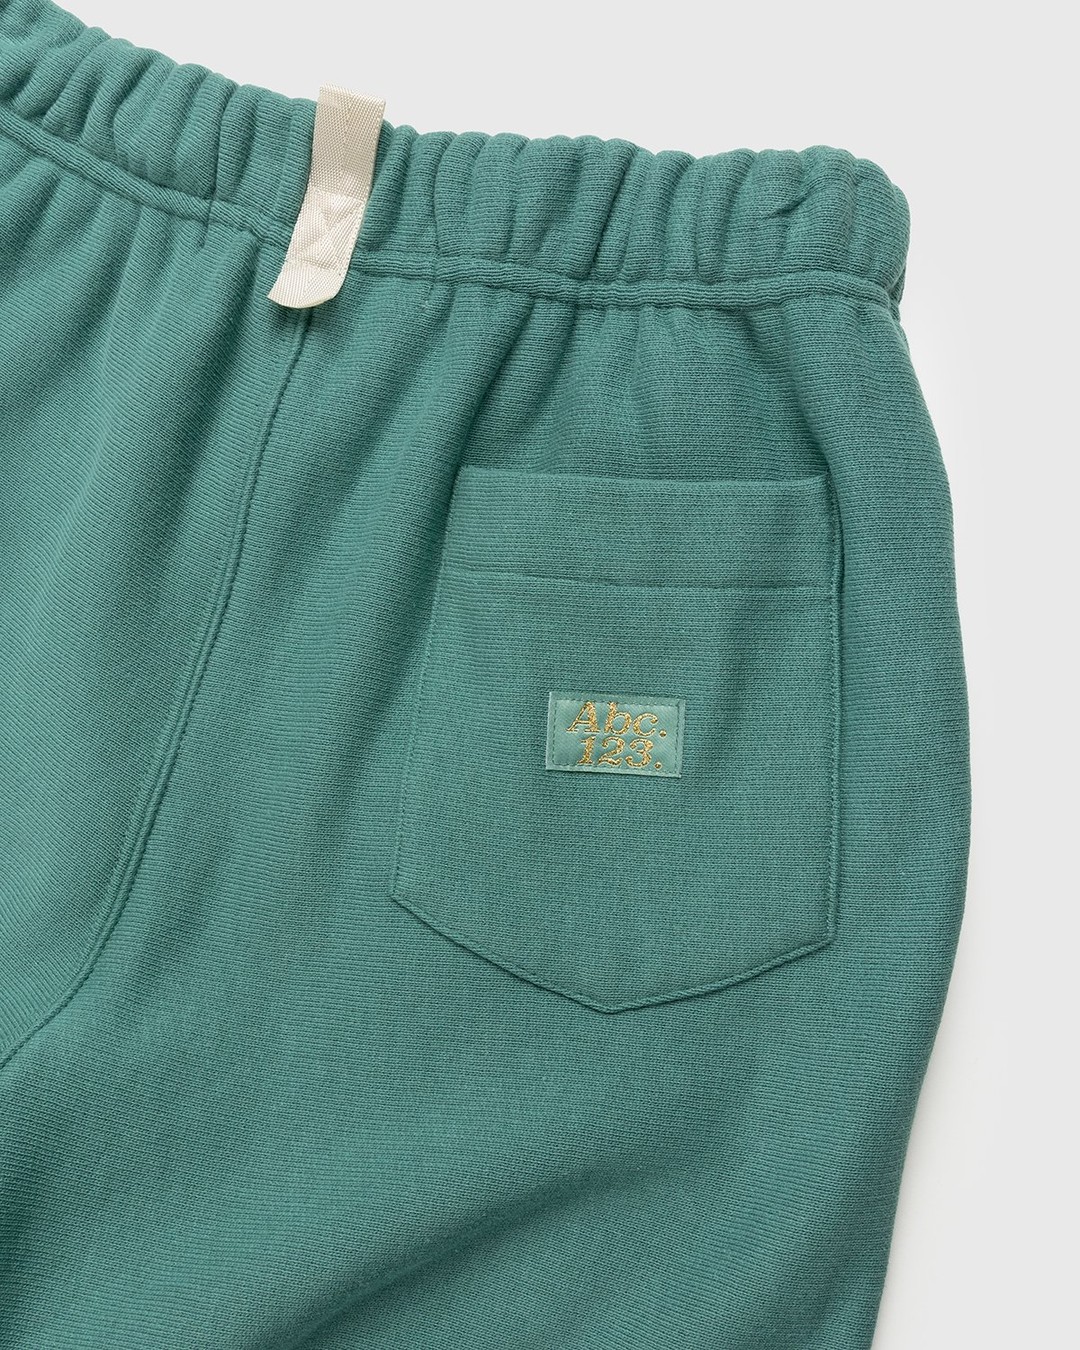 Abc. – French Terry Sweatpants Apatite - Pants - Green - Image 3